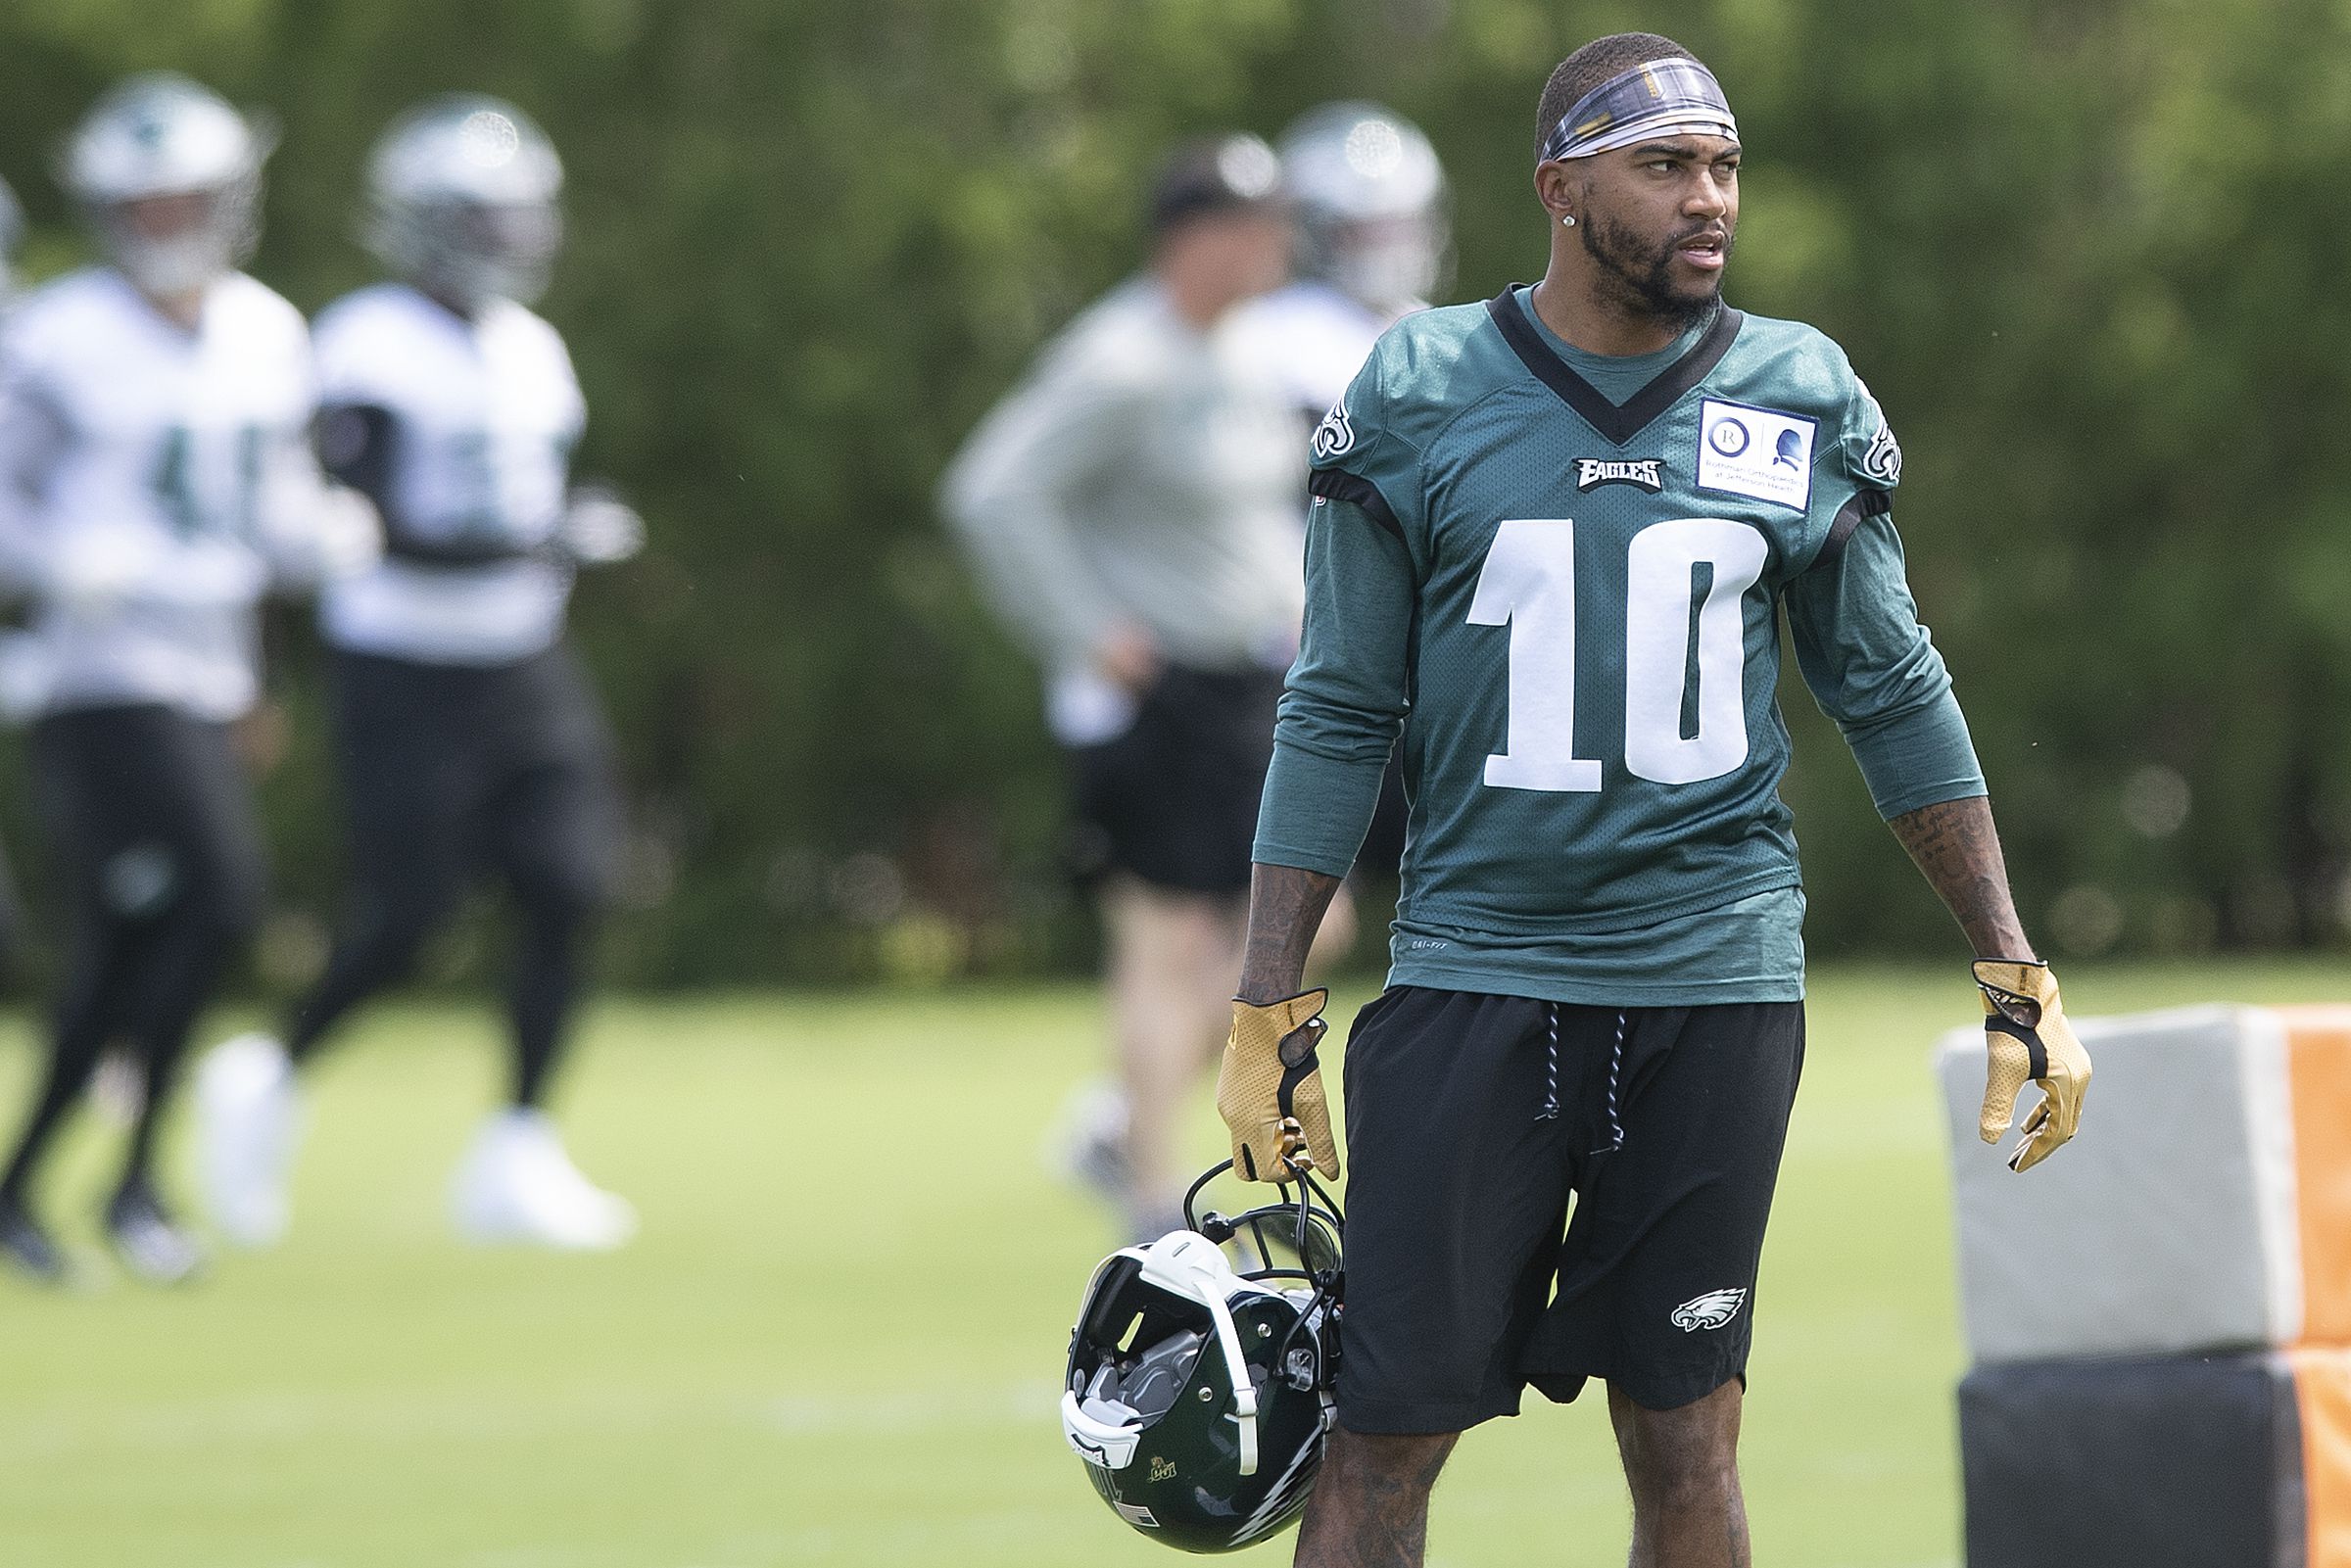 The Eagles need more production from their wide receivers. Can